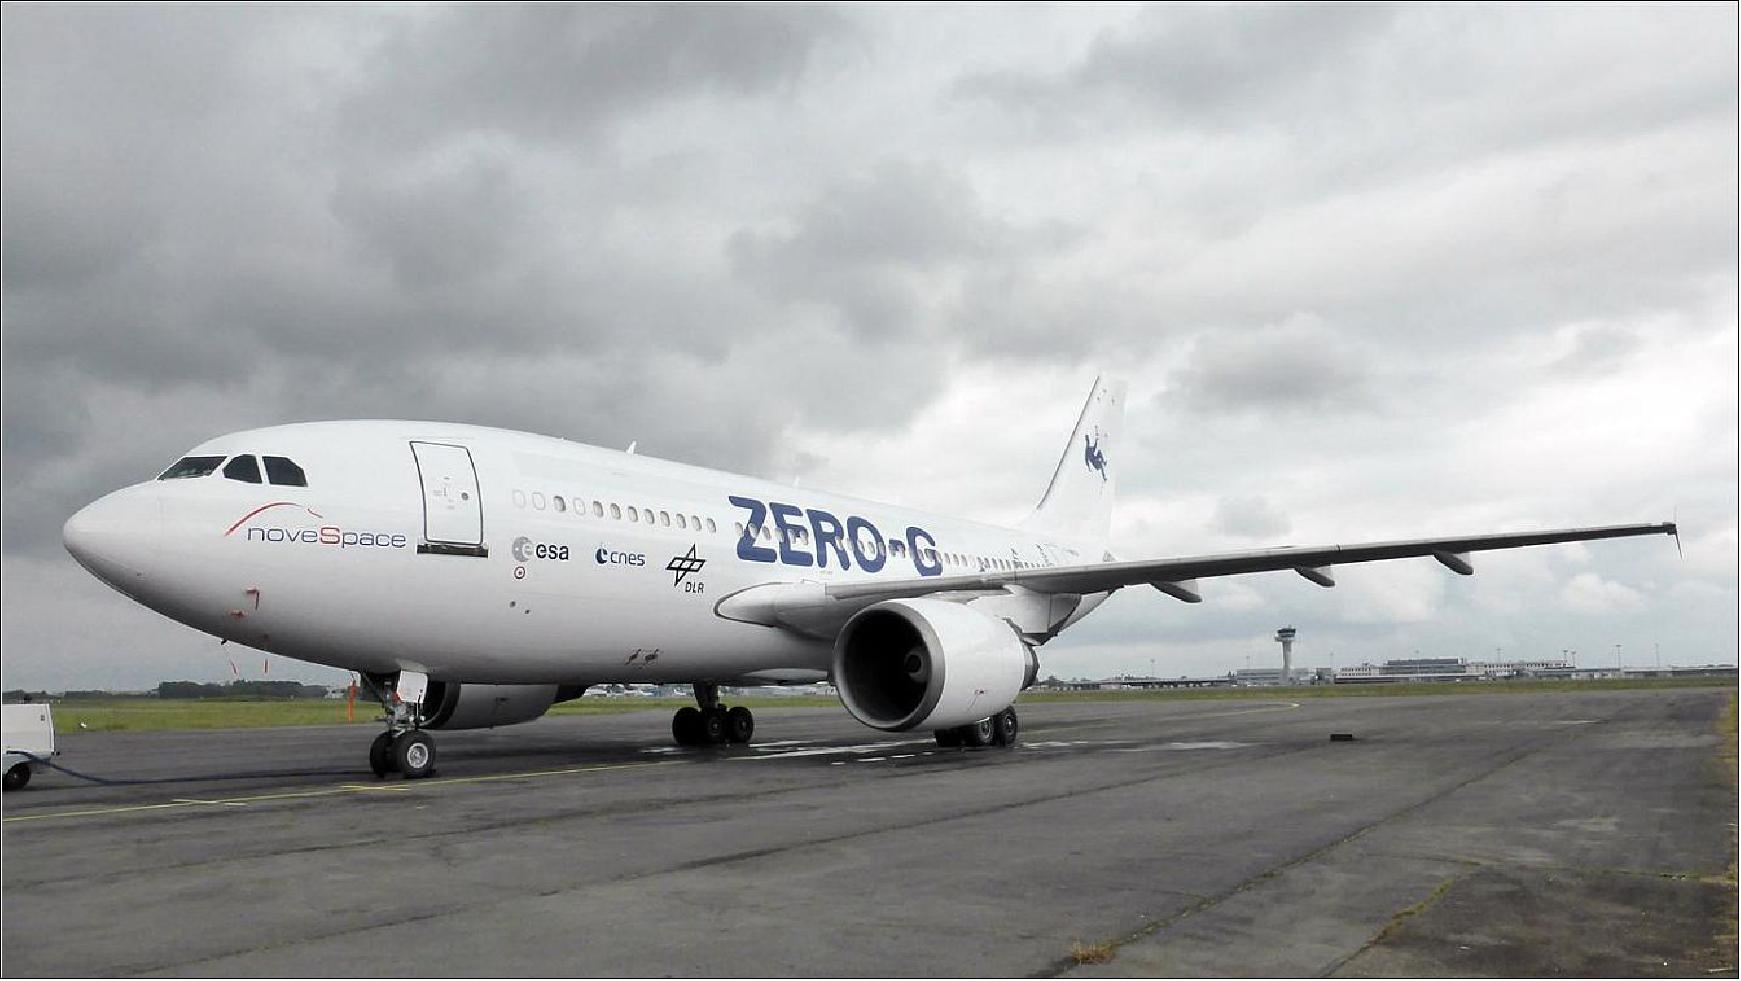 Figure 1: Photograph of the newly refitted Airbus Zero-G A310 aircraft and ready for its first flight for weightless research (image credit: ESA, CNES, DLR)